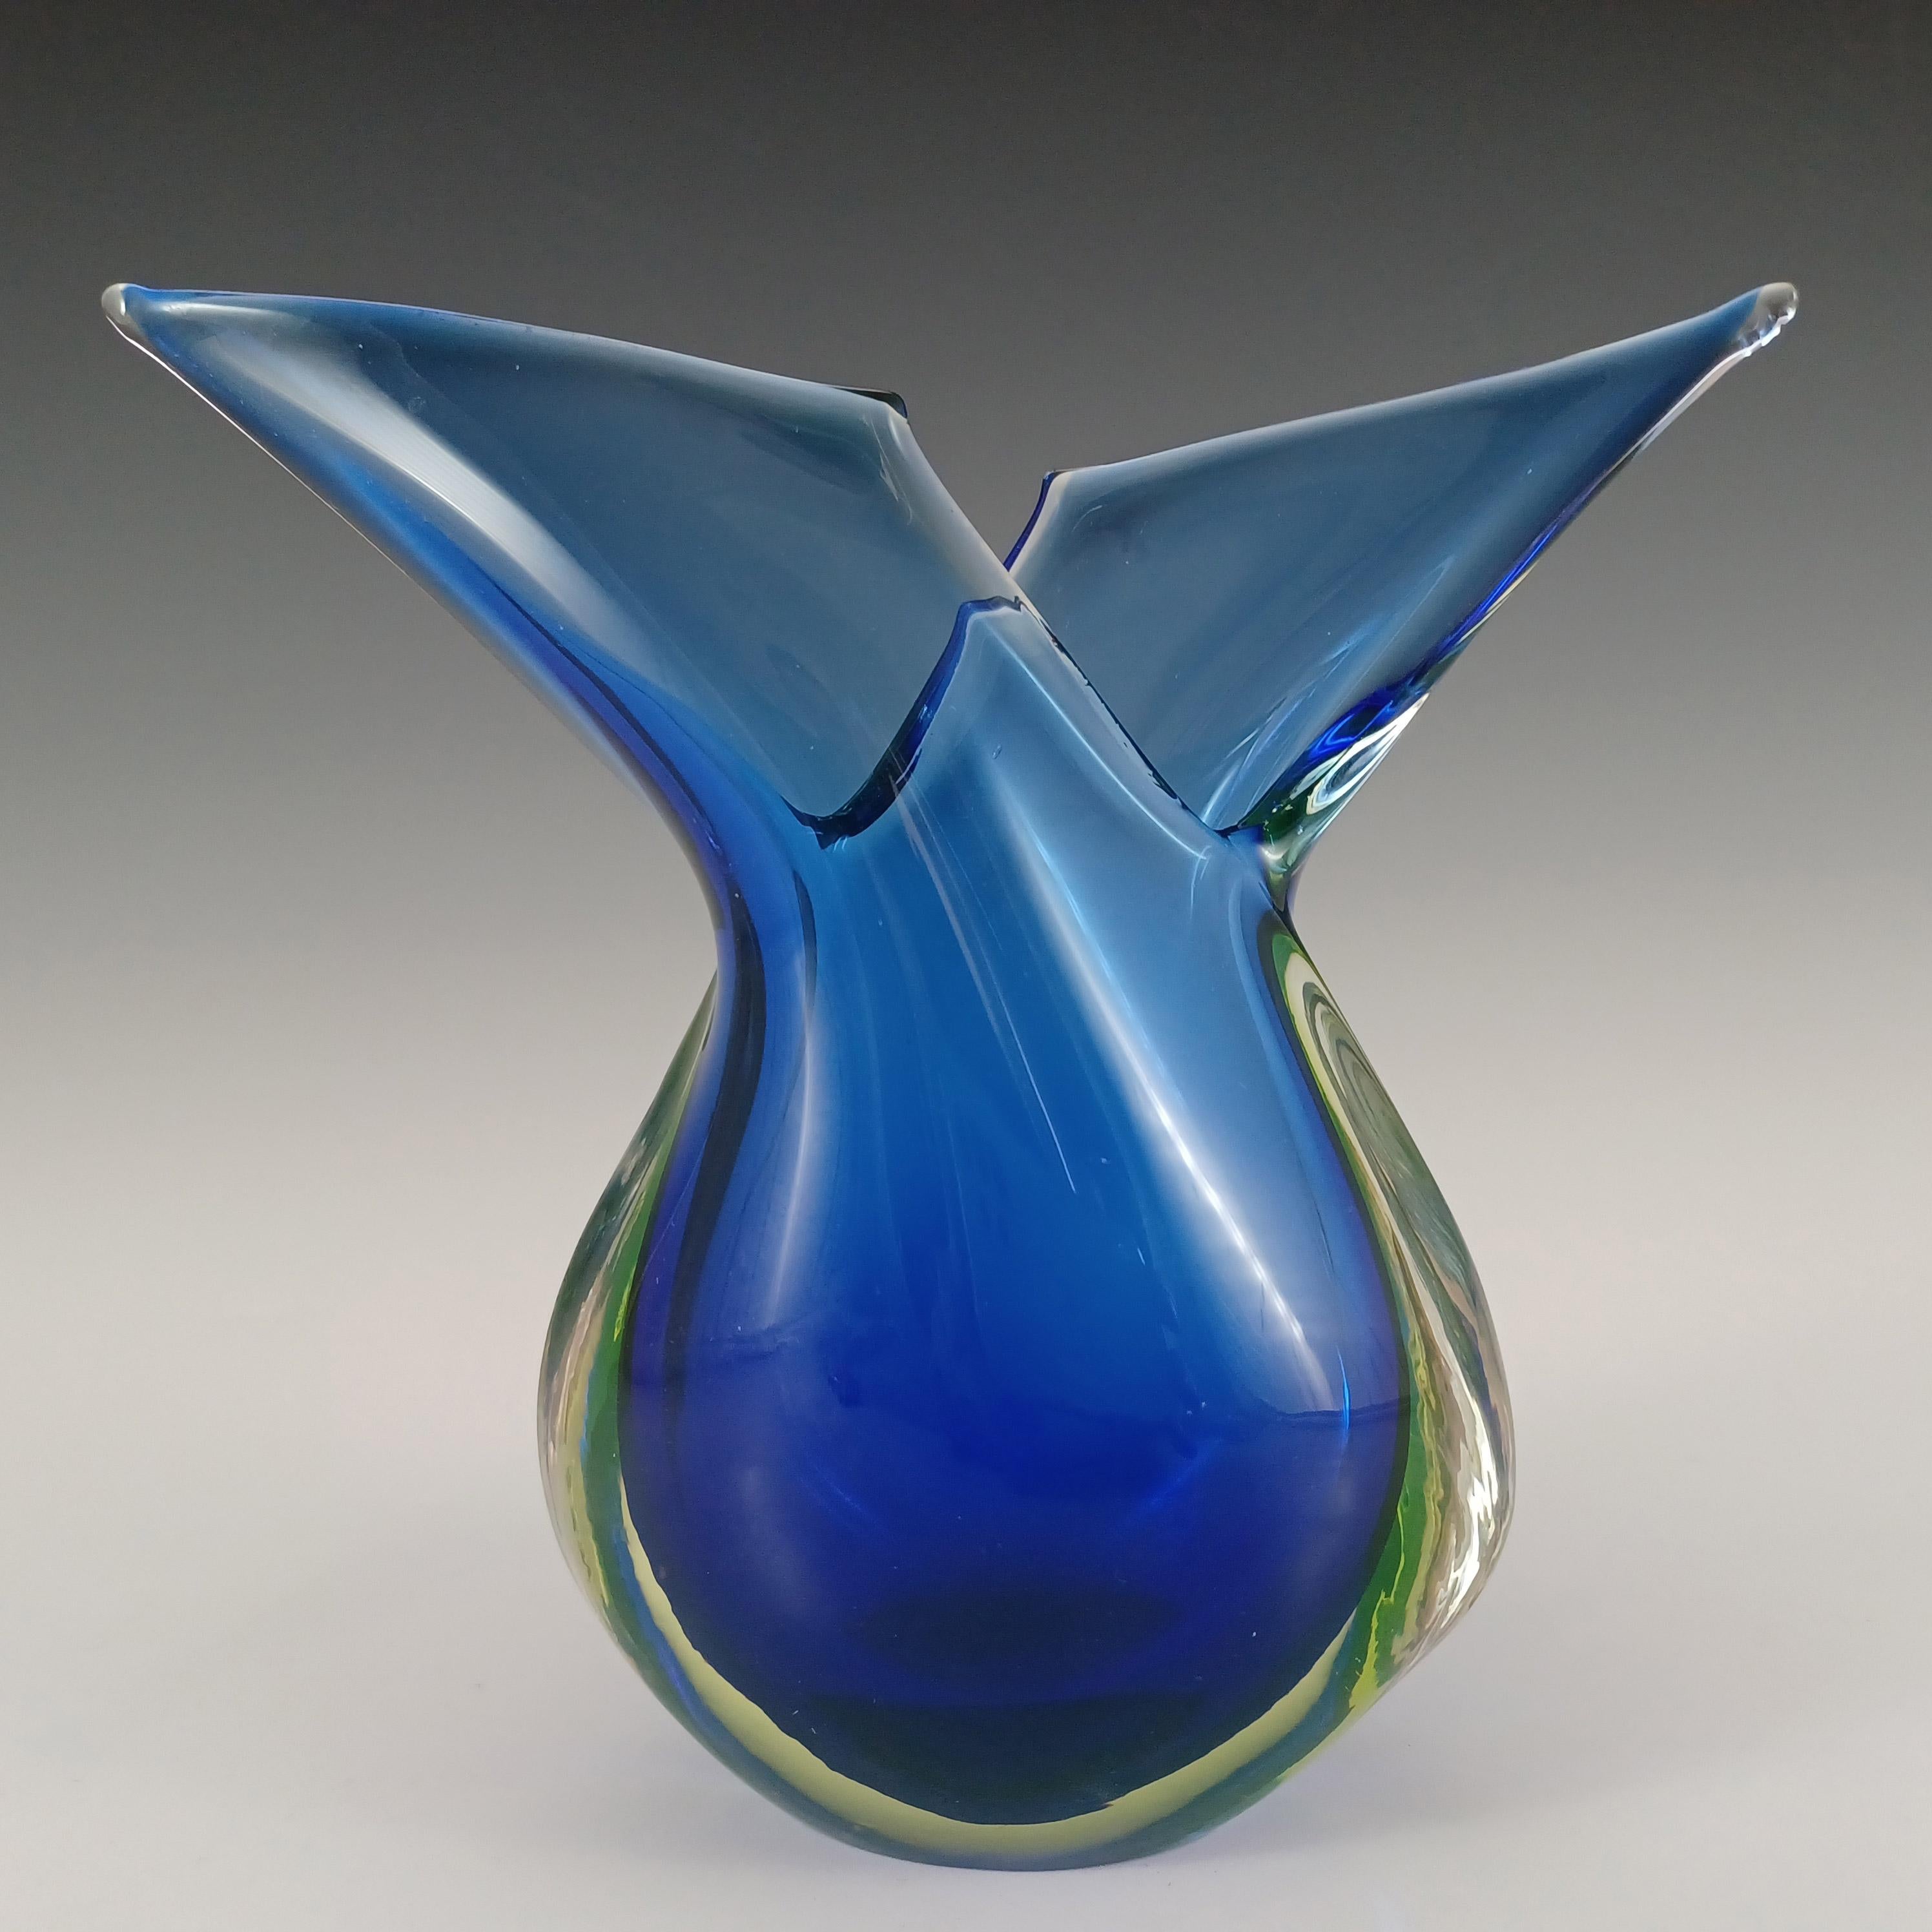 Here is a wonderful Venetian organic glass vase, made on the island of Murano, near Venice, Italy. In a stunning combination of blue glass cased in uranium yellow green glass, which is further encased in clear glass, using the renowned Venetian